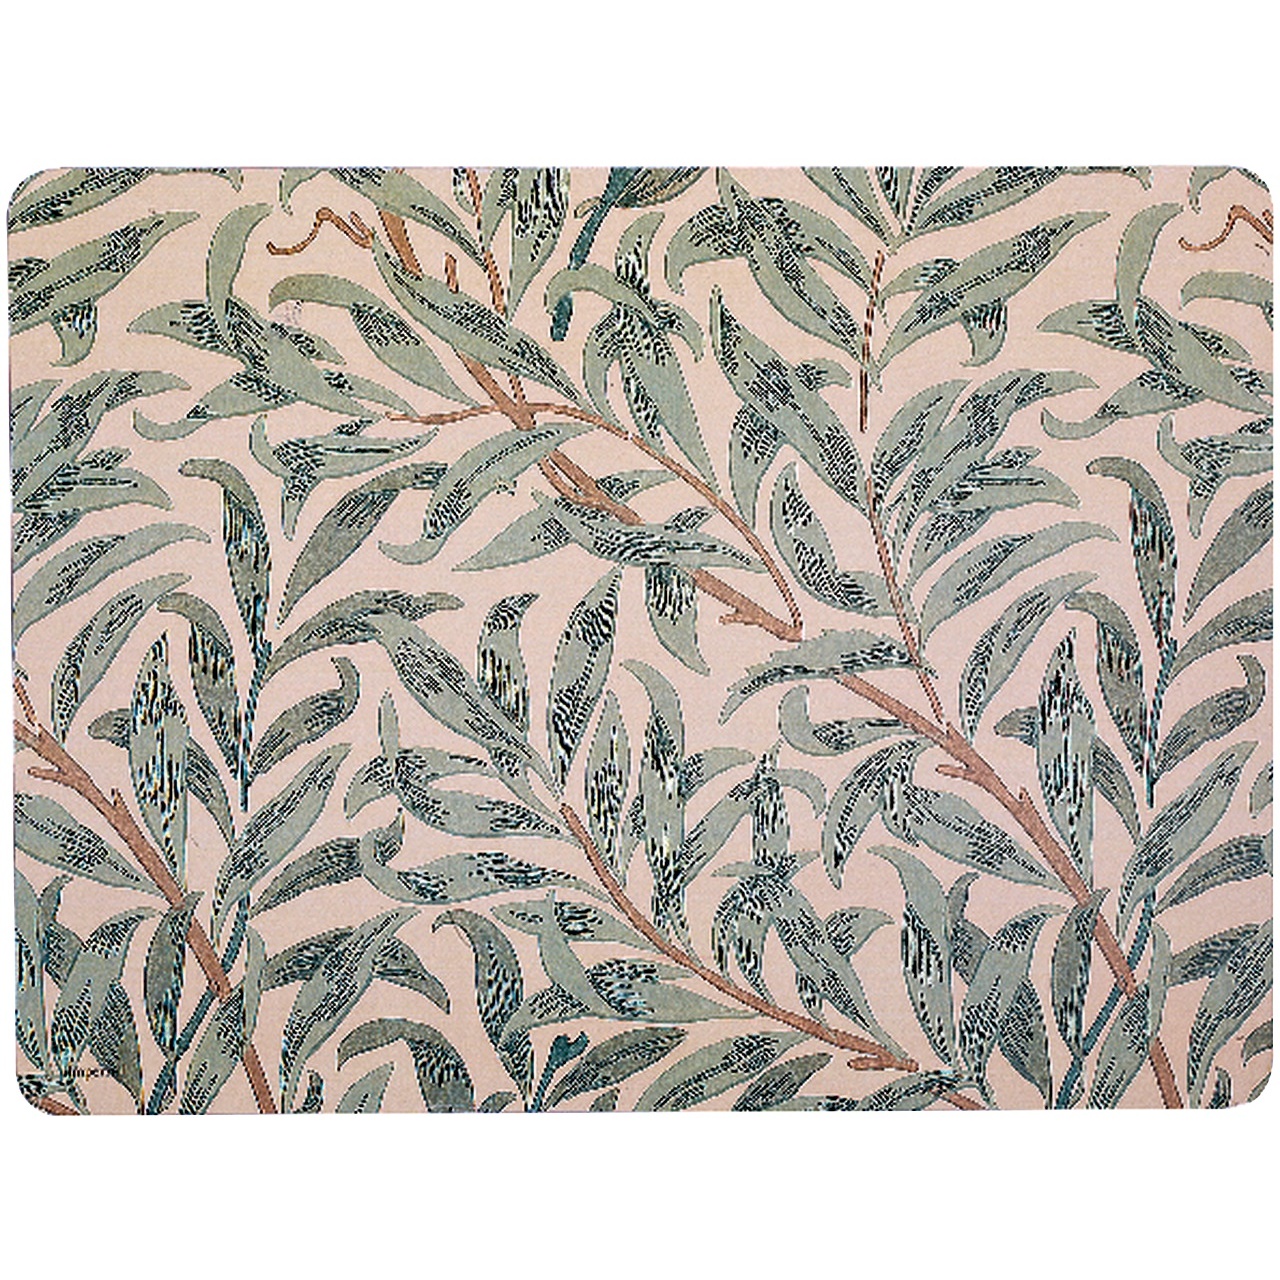 Pimpernel William Morris Placemats and FREE Coasters - Set of 6